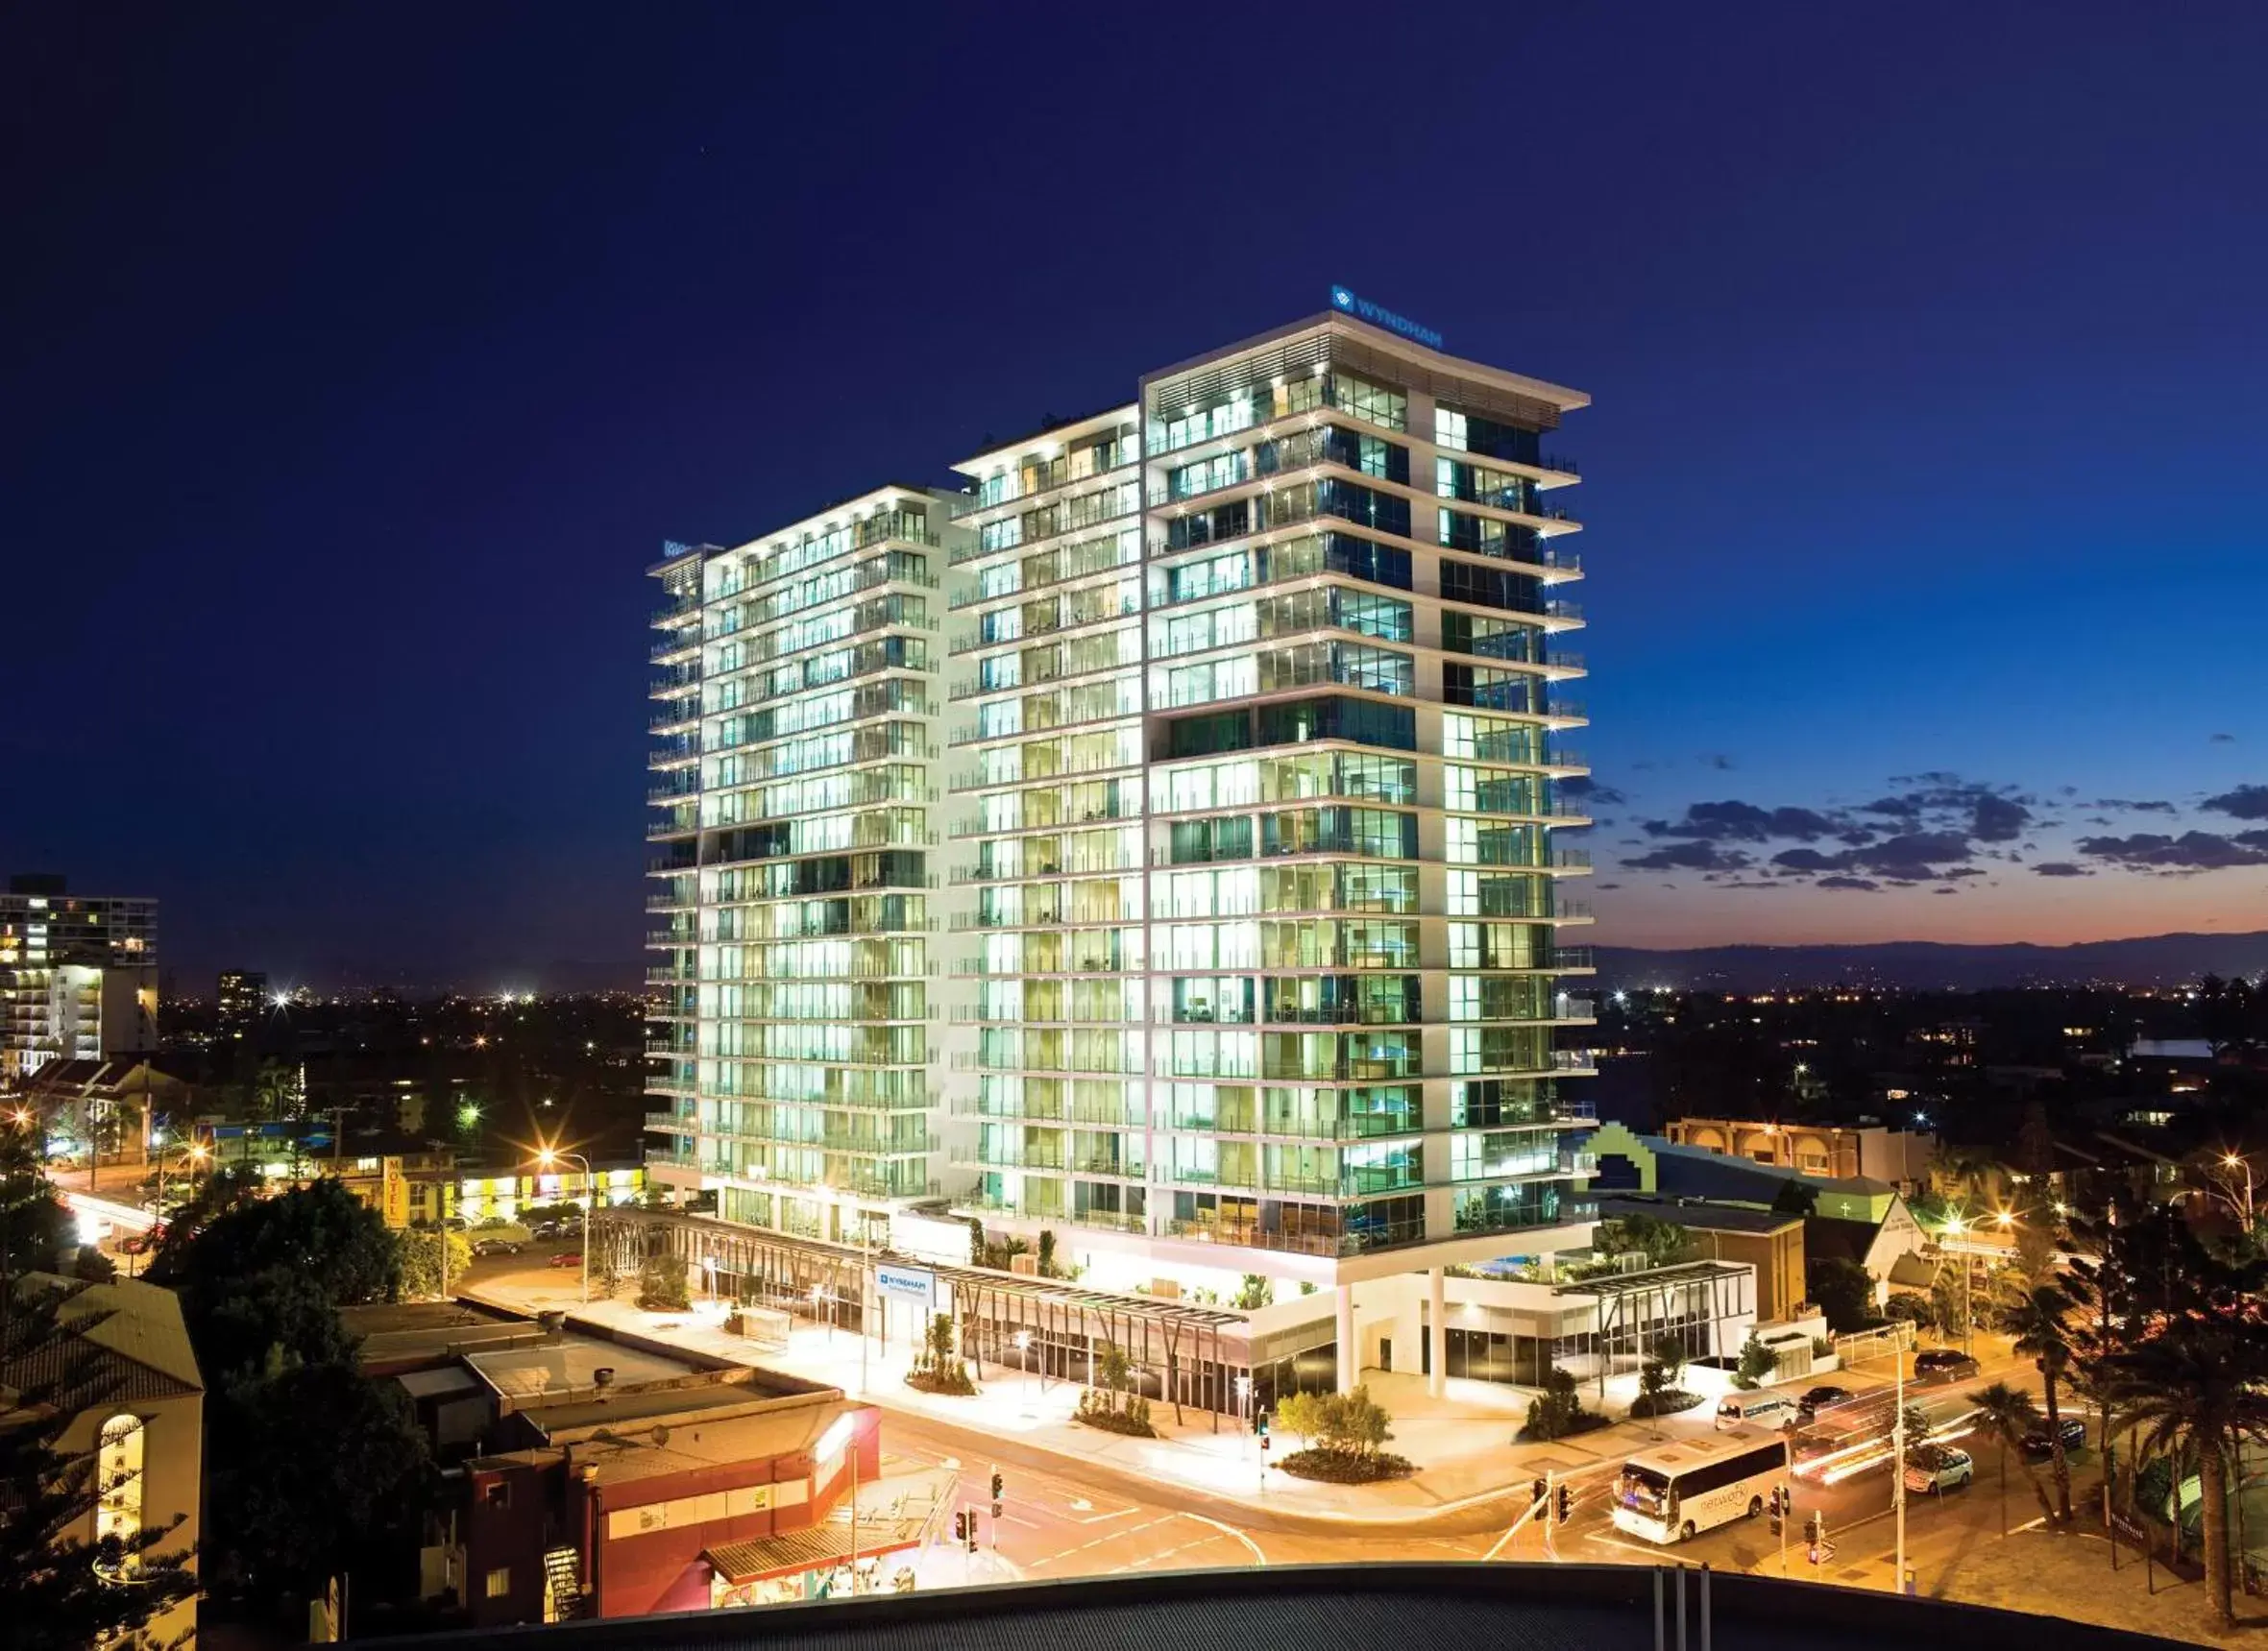 Property building in Wyndham Resort Surfers Paradise